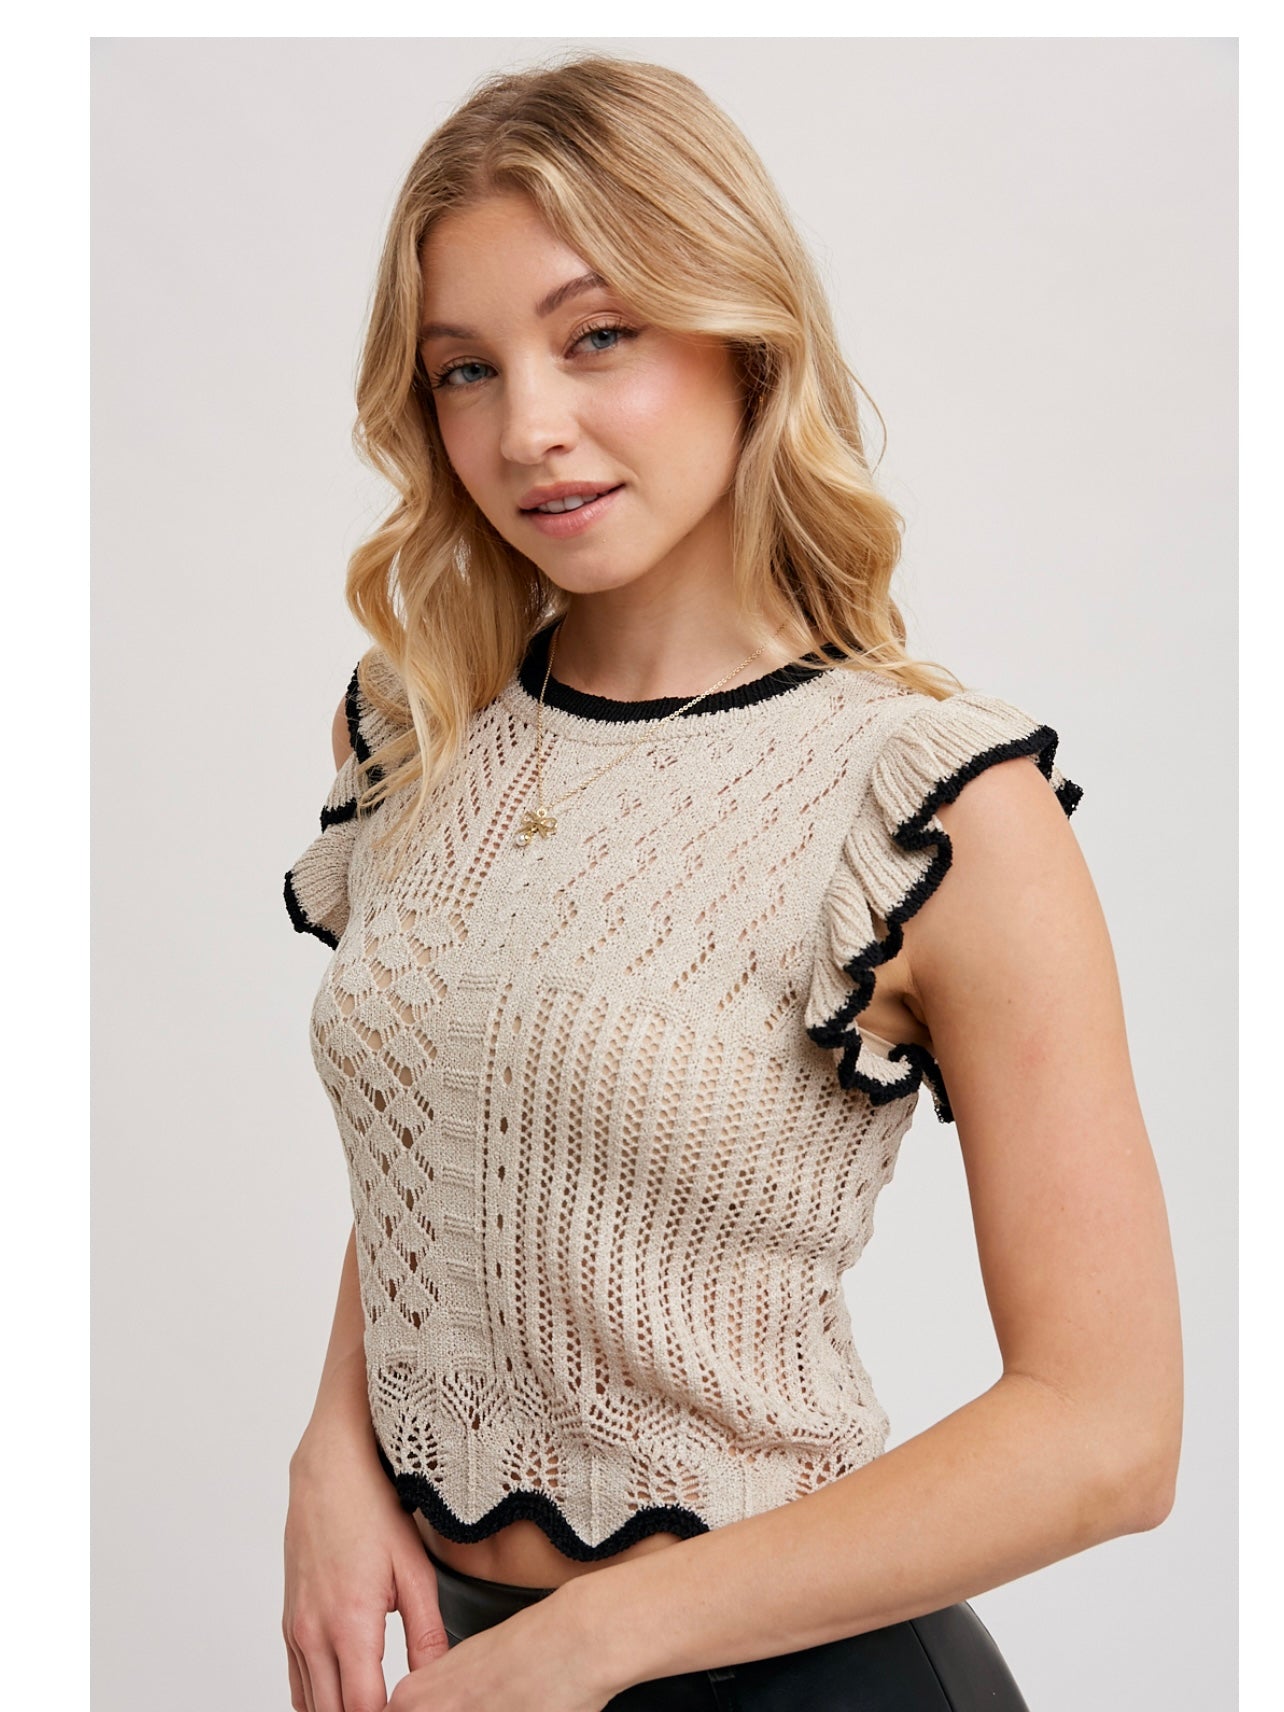 The Lori-Eyelet Contrast Knit Ruffled Scalloped Top in Oatmeal